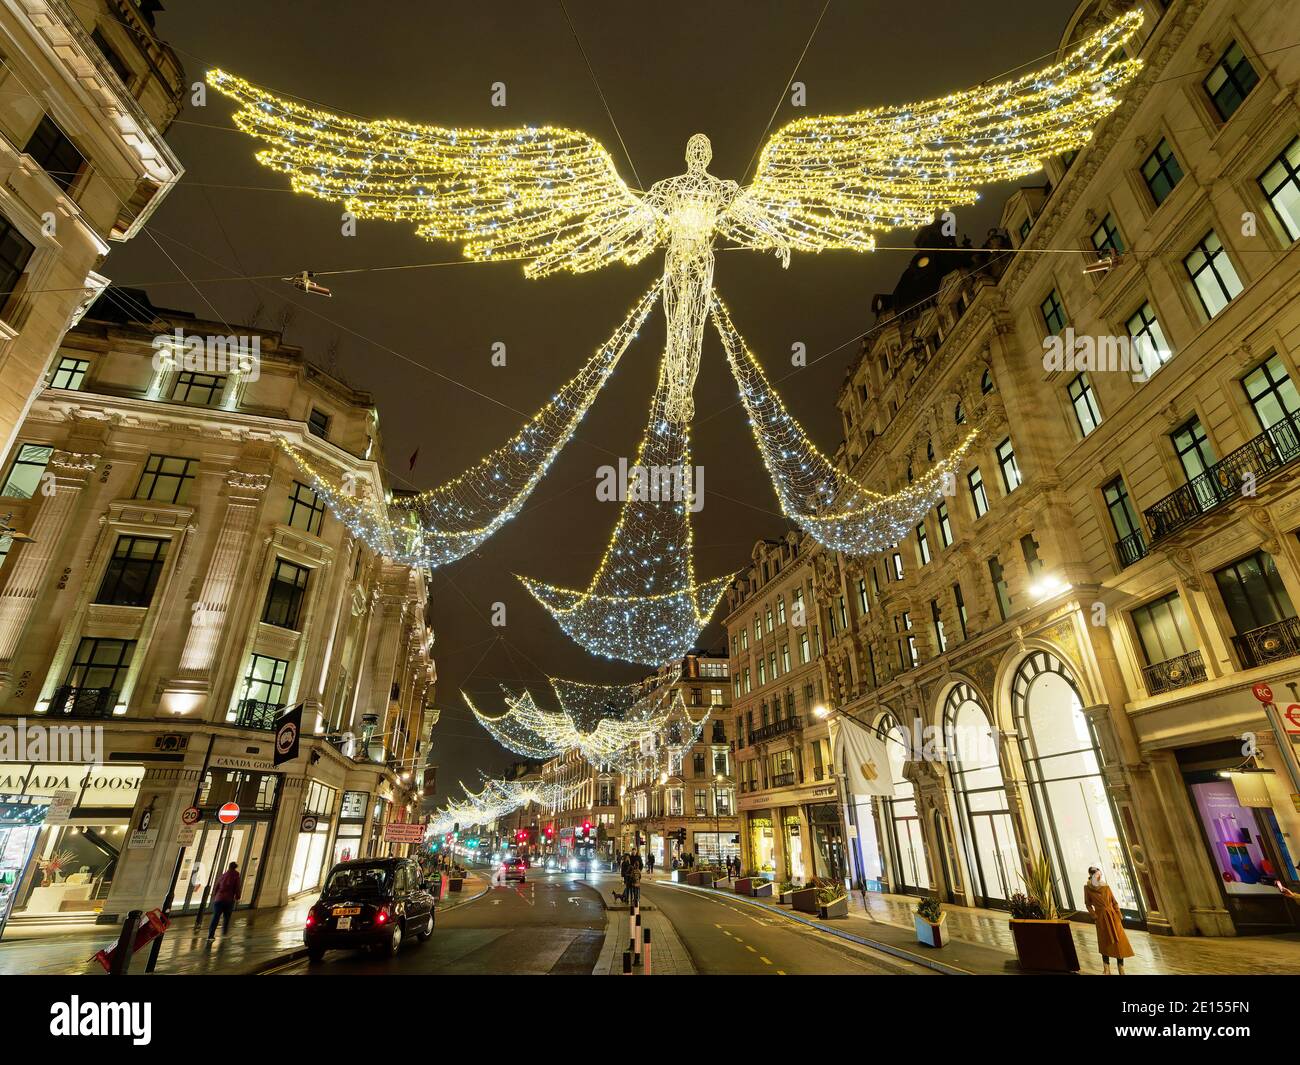 View looking up at the festive Christmas decorations at night in Regent Street London 2020 Stock Photo